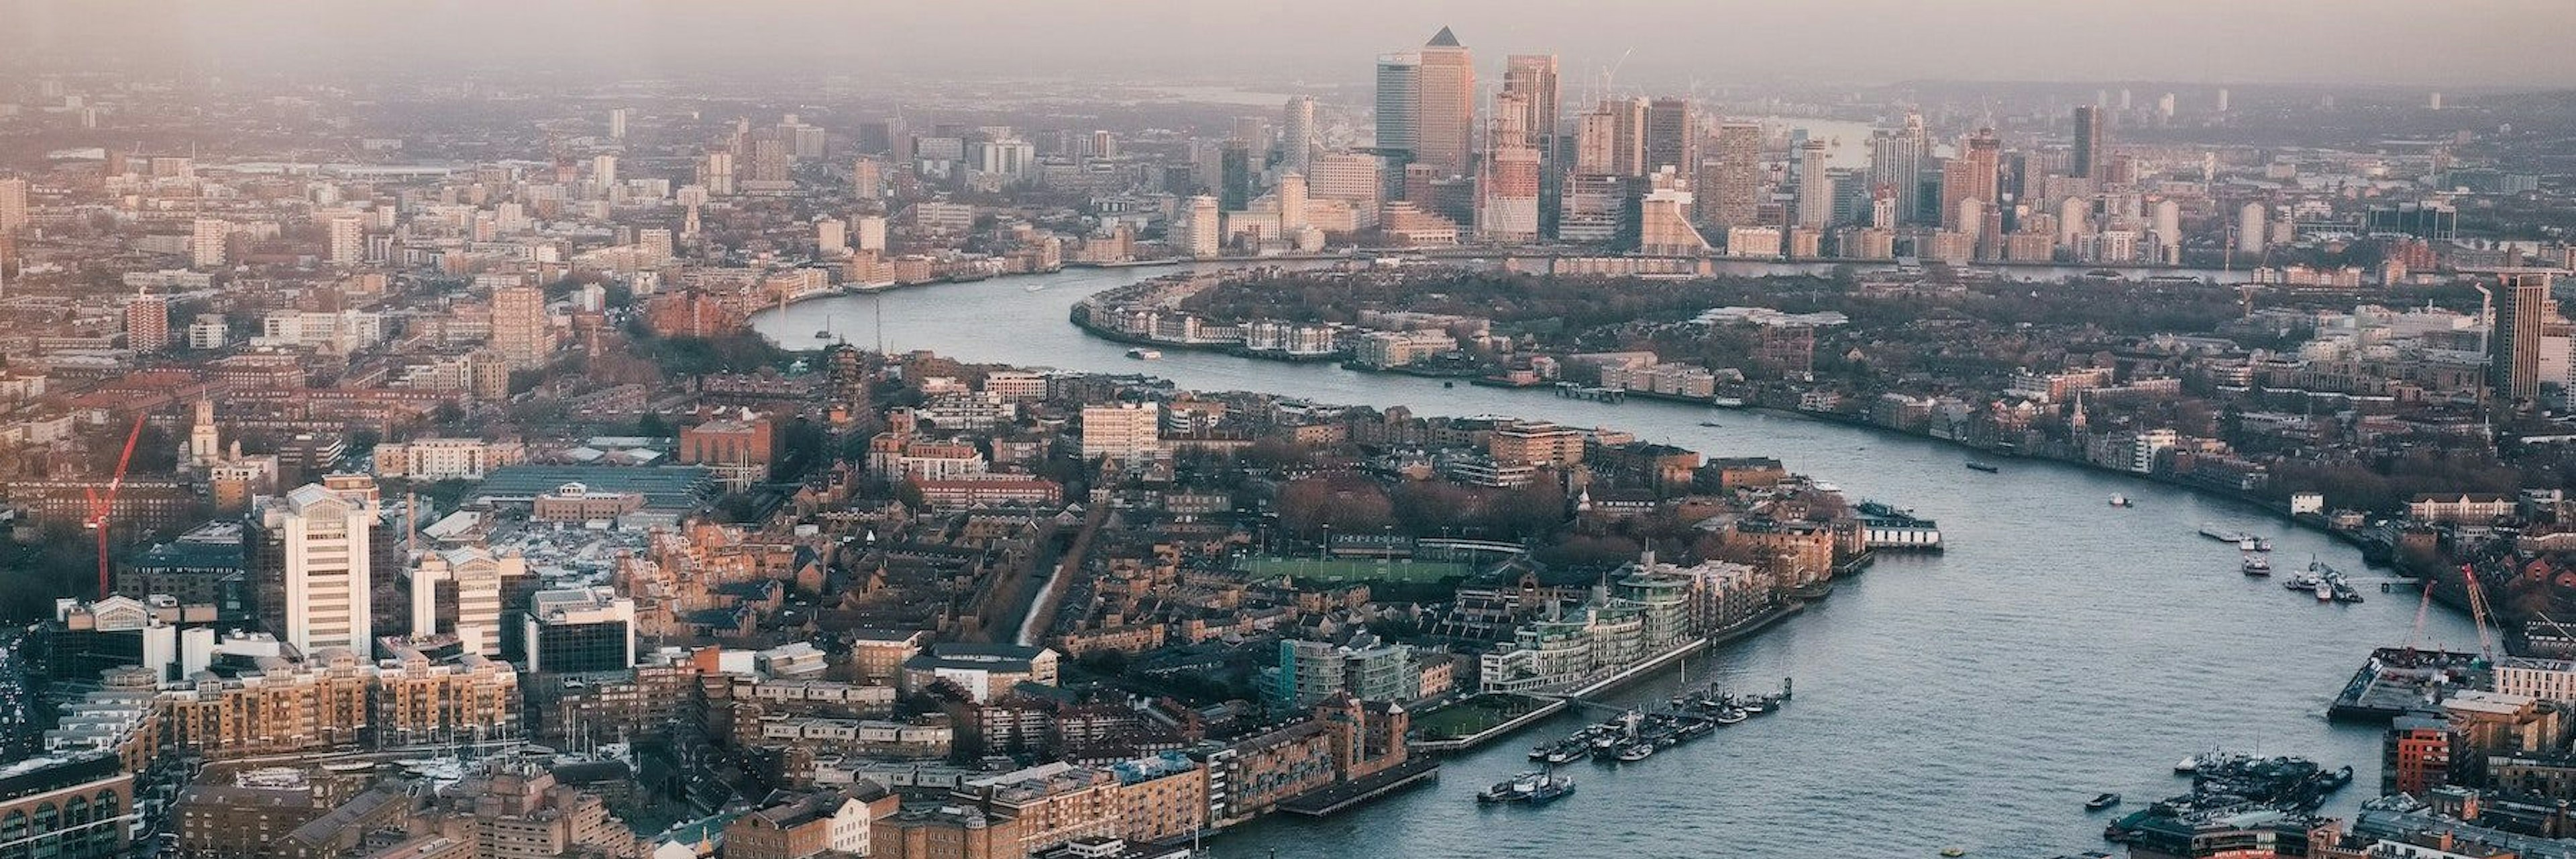 An aerial image of the River Thames, London